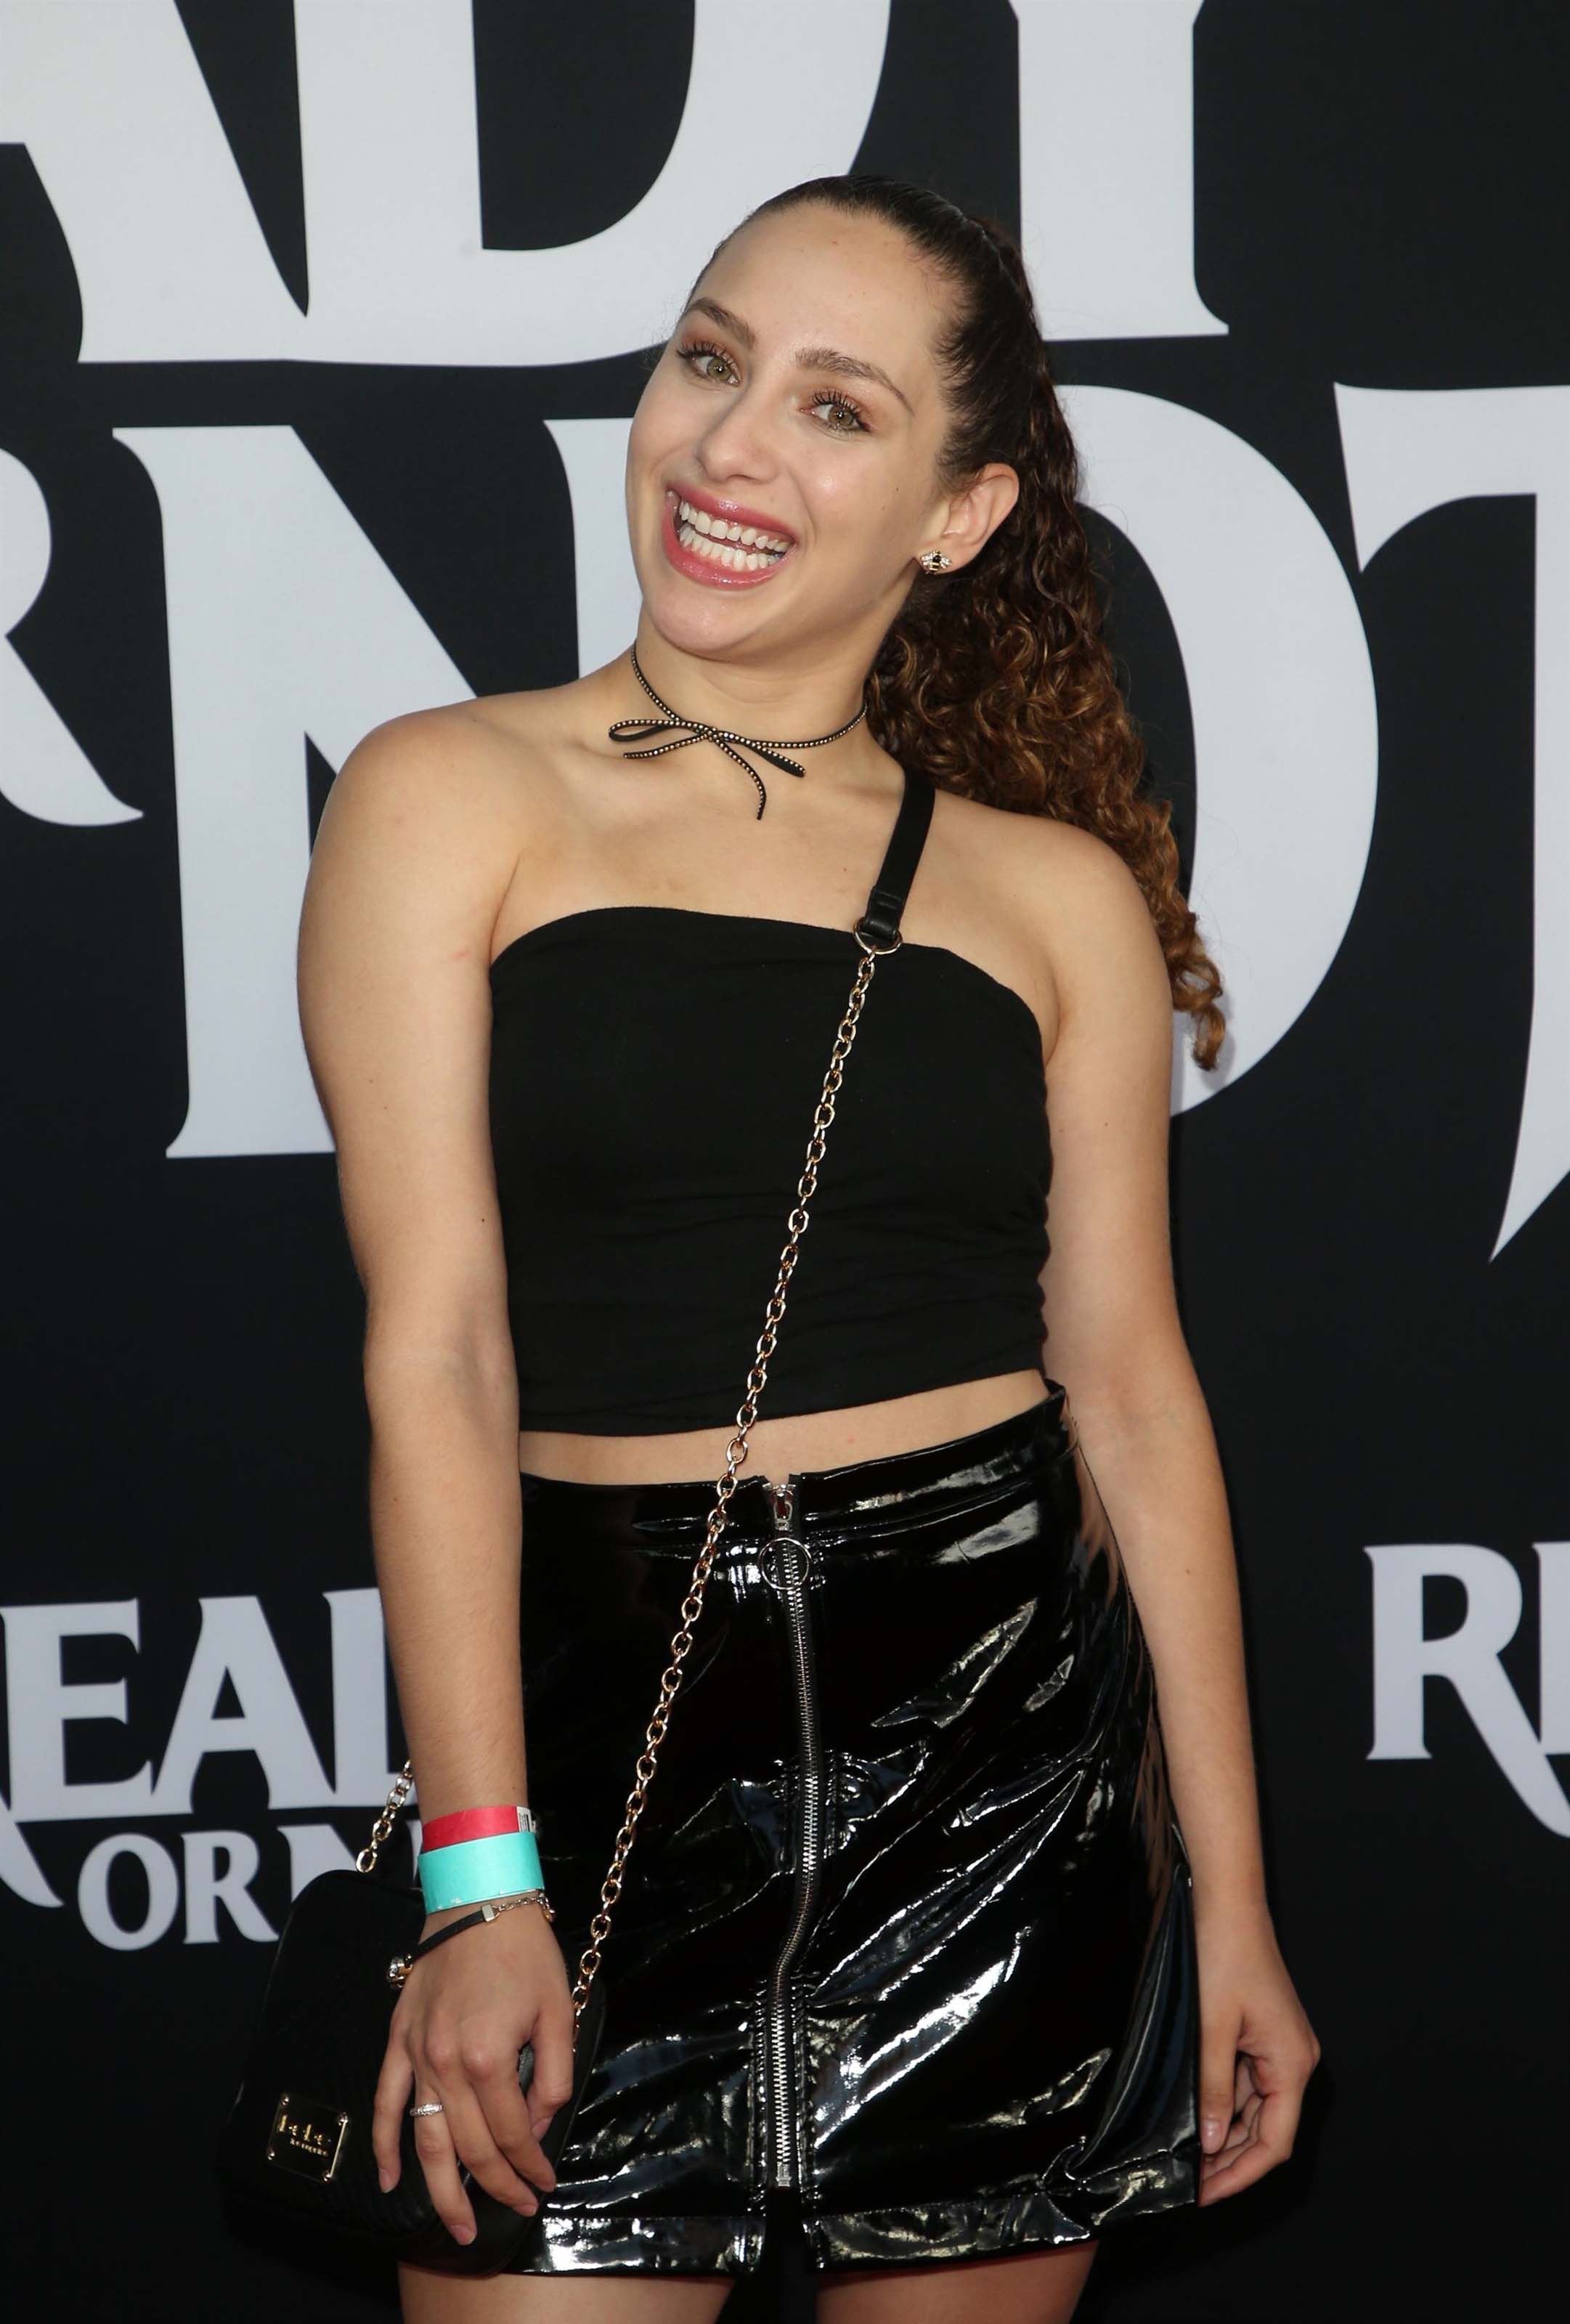 Helene Britany attends Ready or Not film premiere